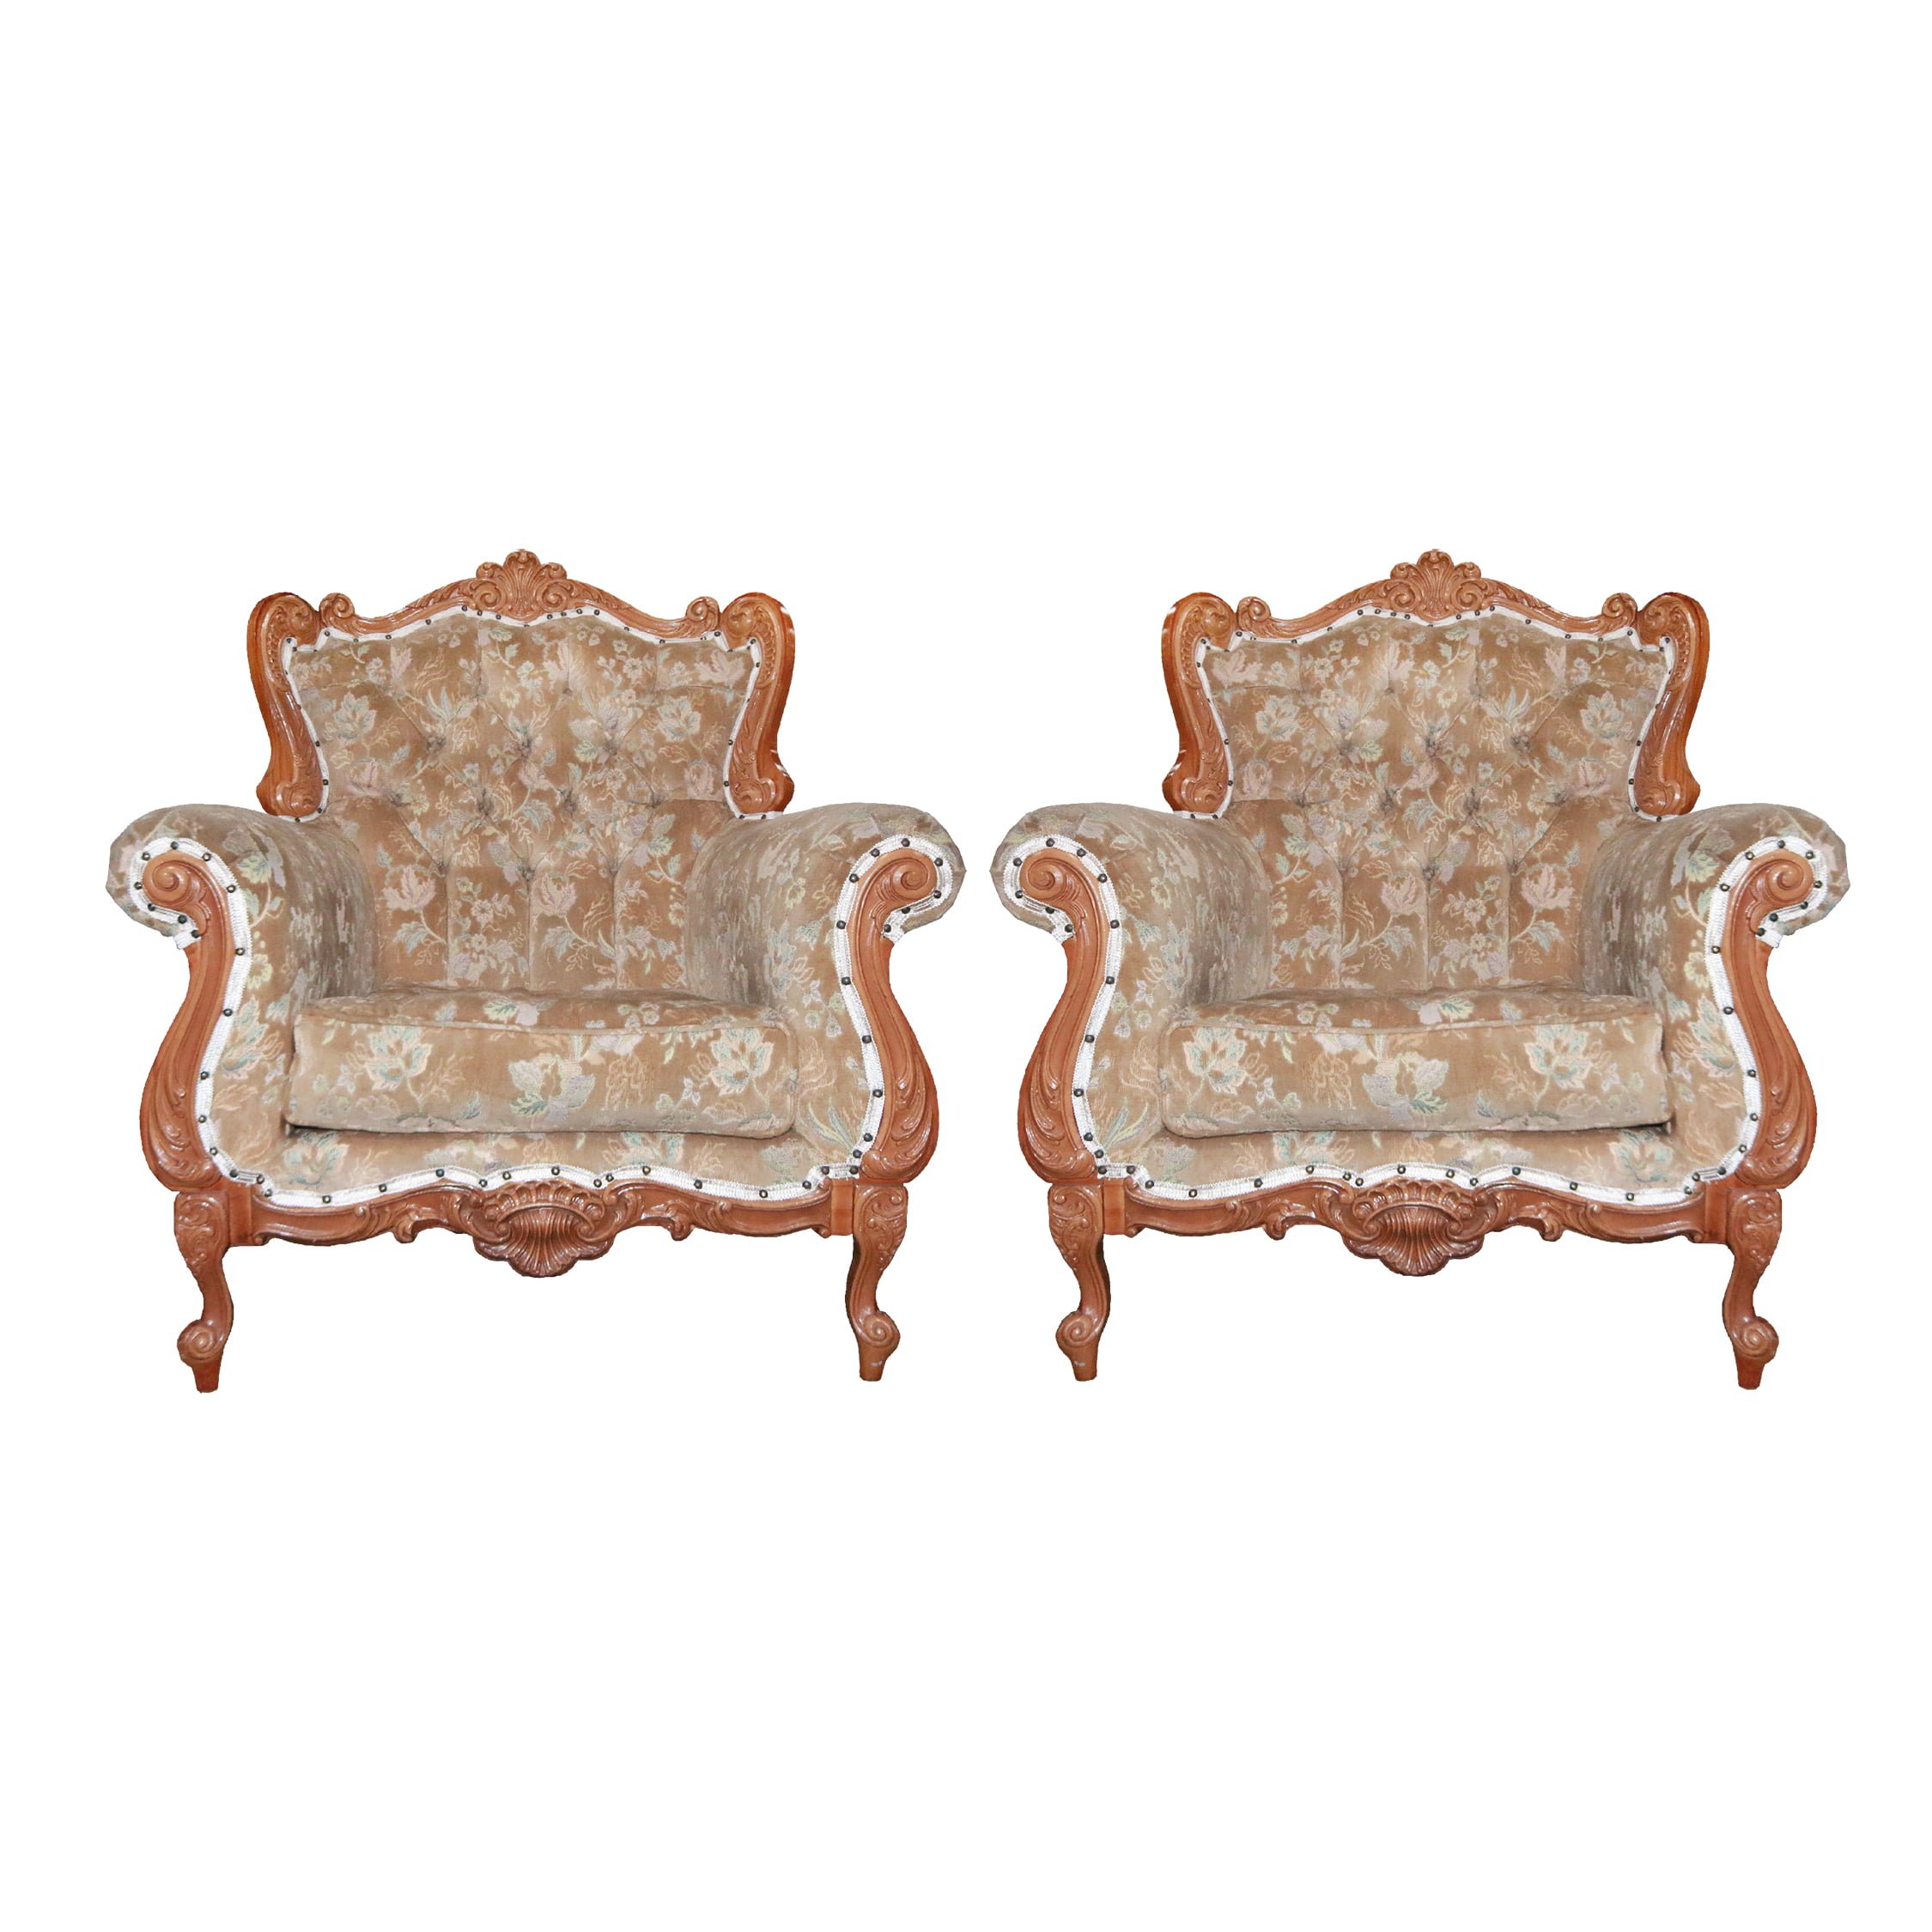 Carved armchairs